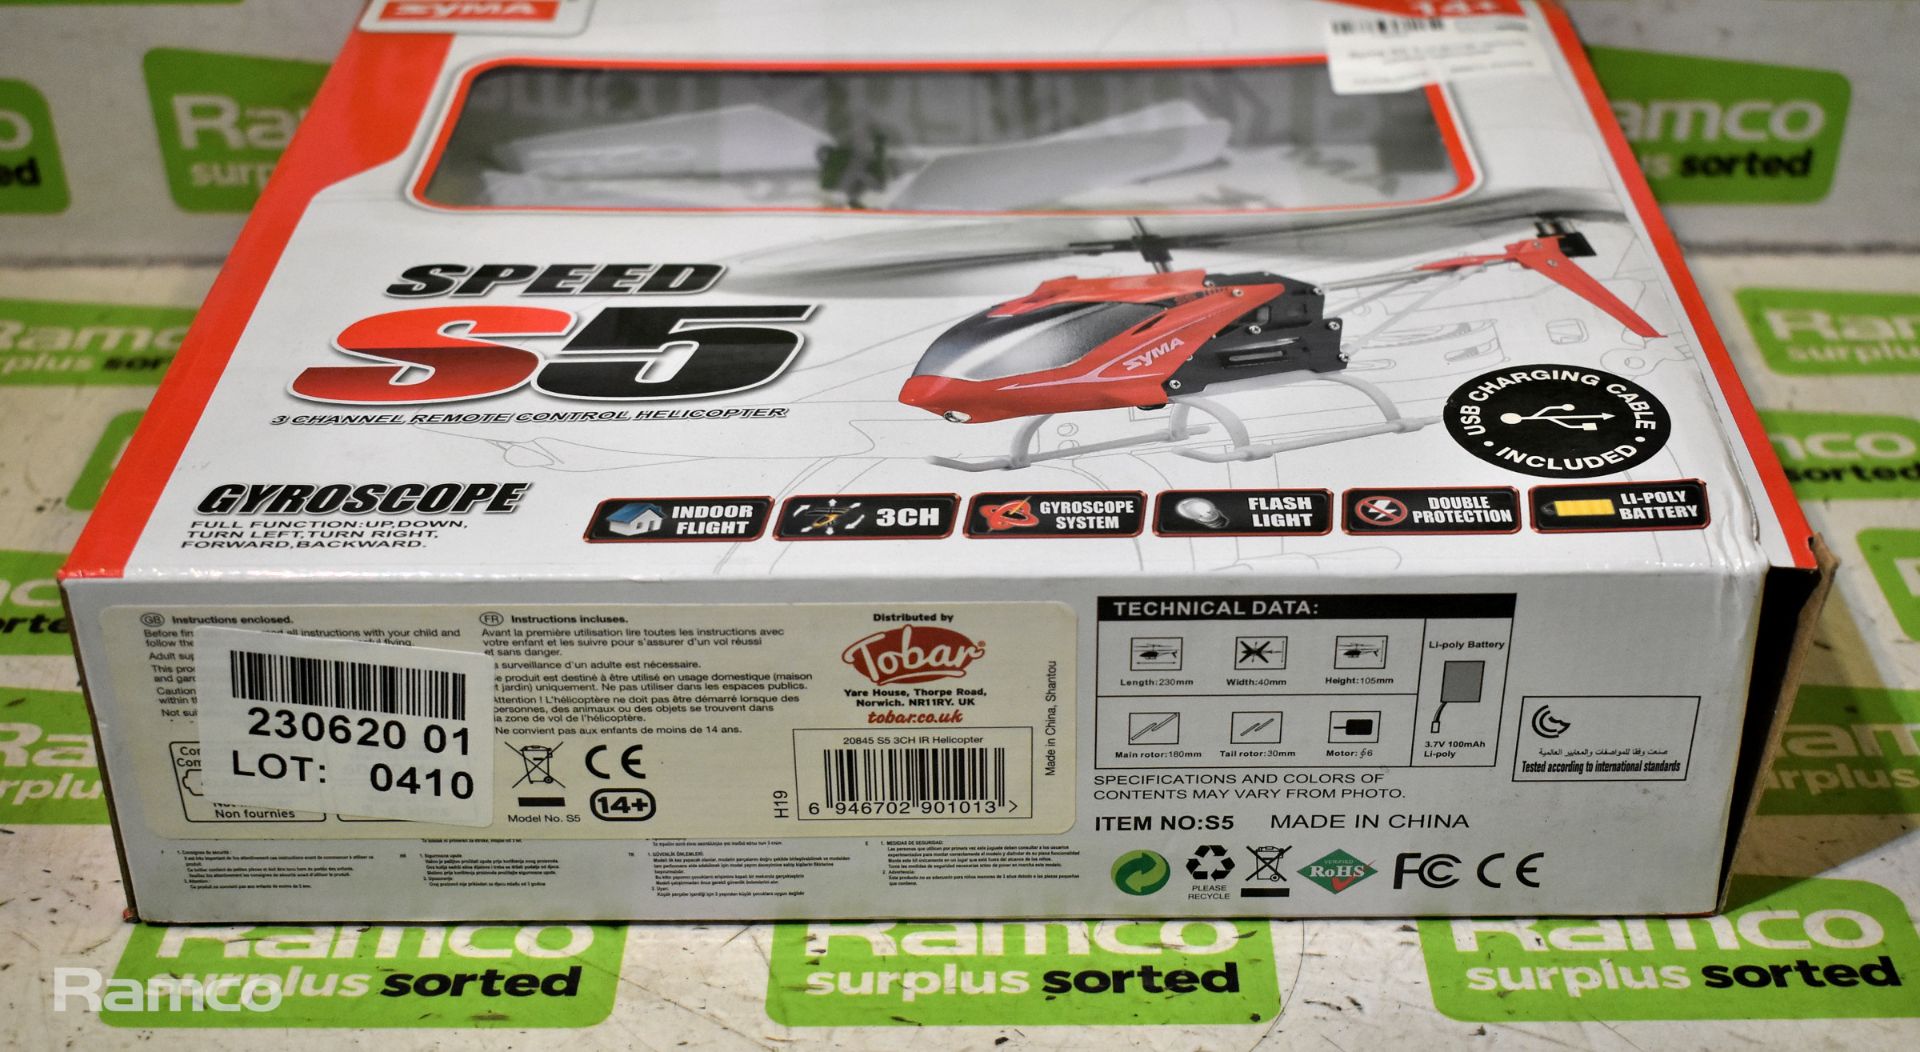 Syma S5 3 channel remote control helicopter - Image 3 of 3